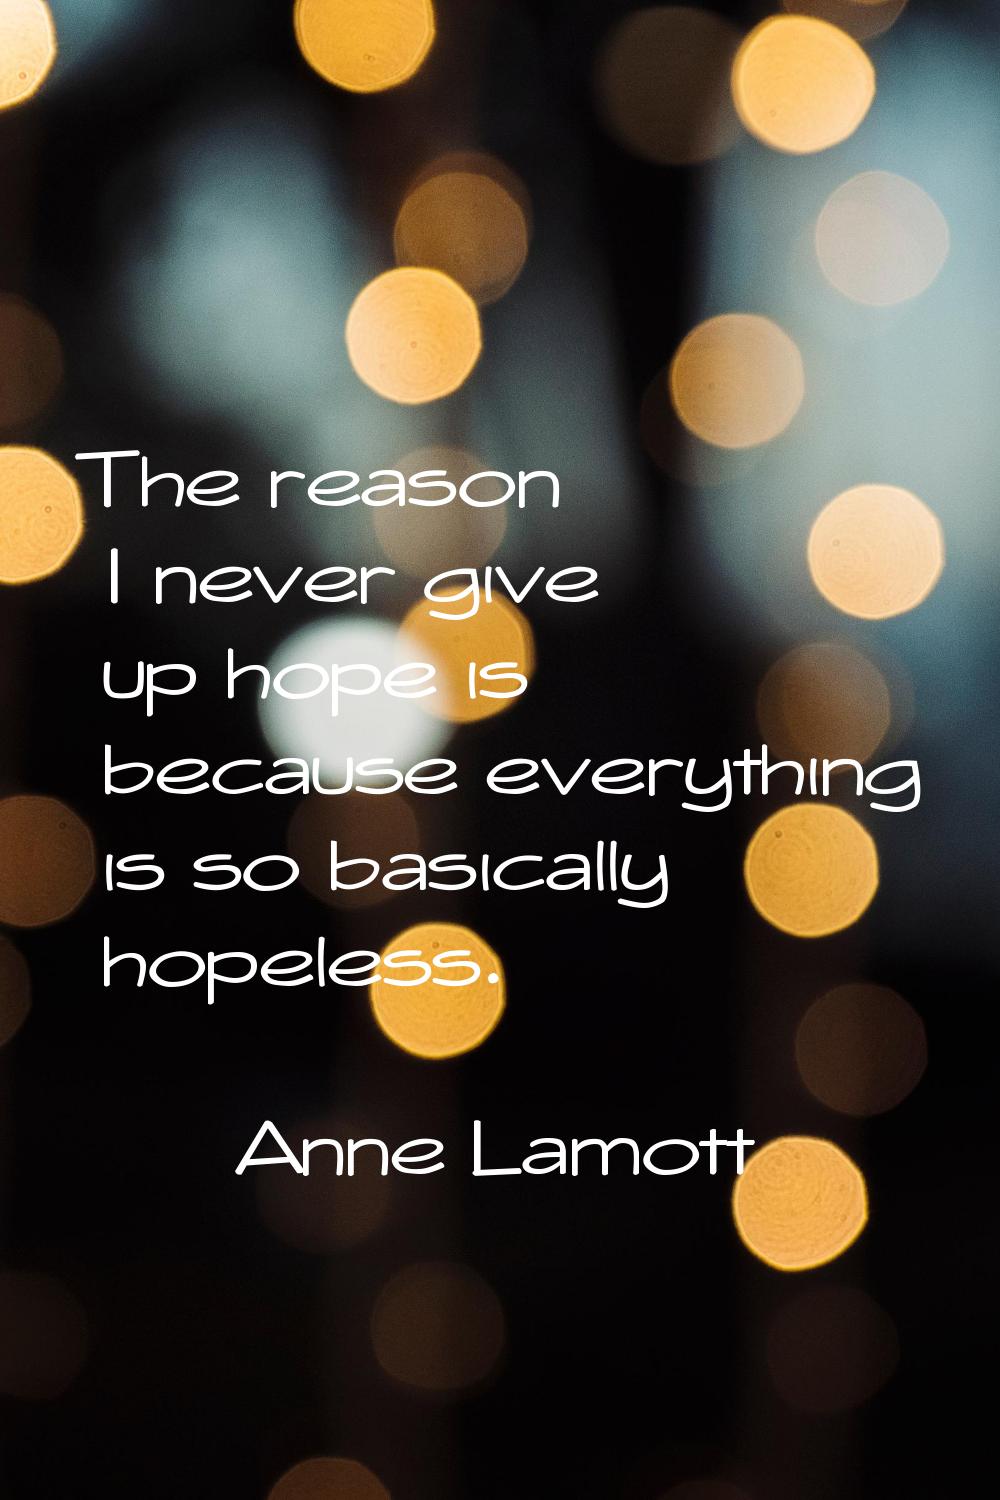 The reason I never give up hope is because everything is so basically hopeless.